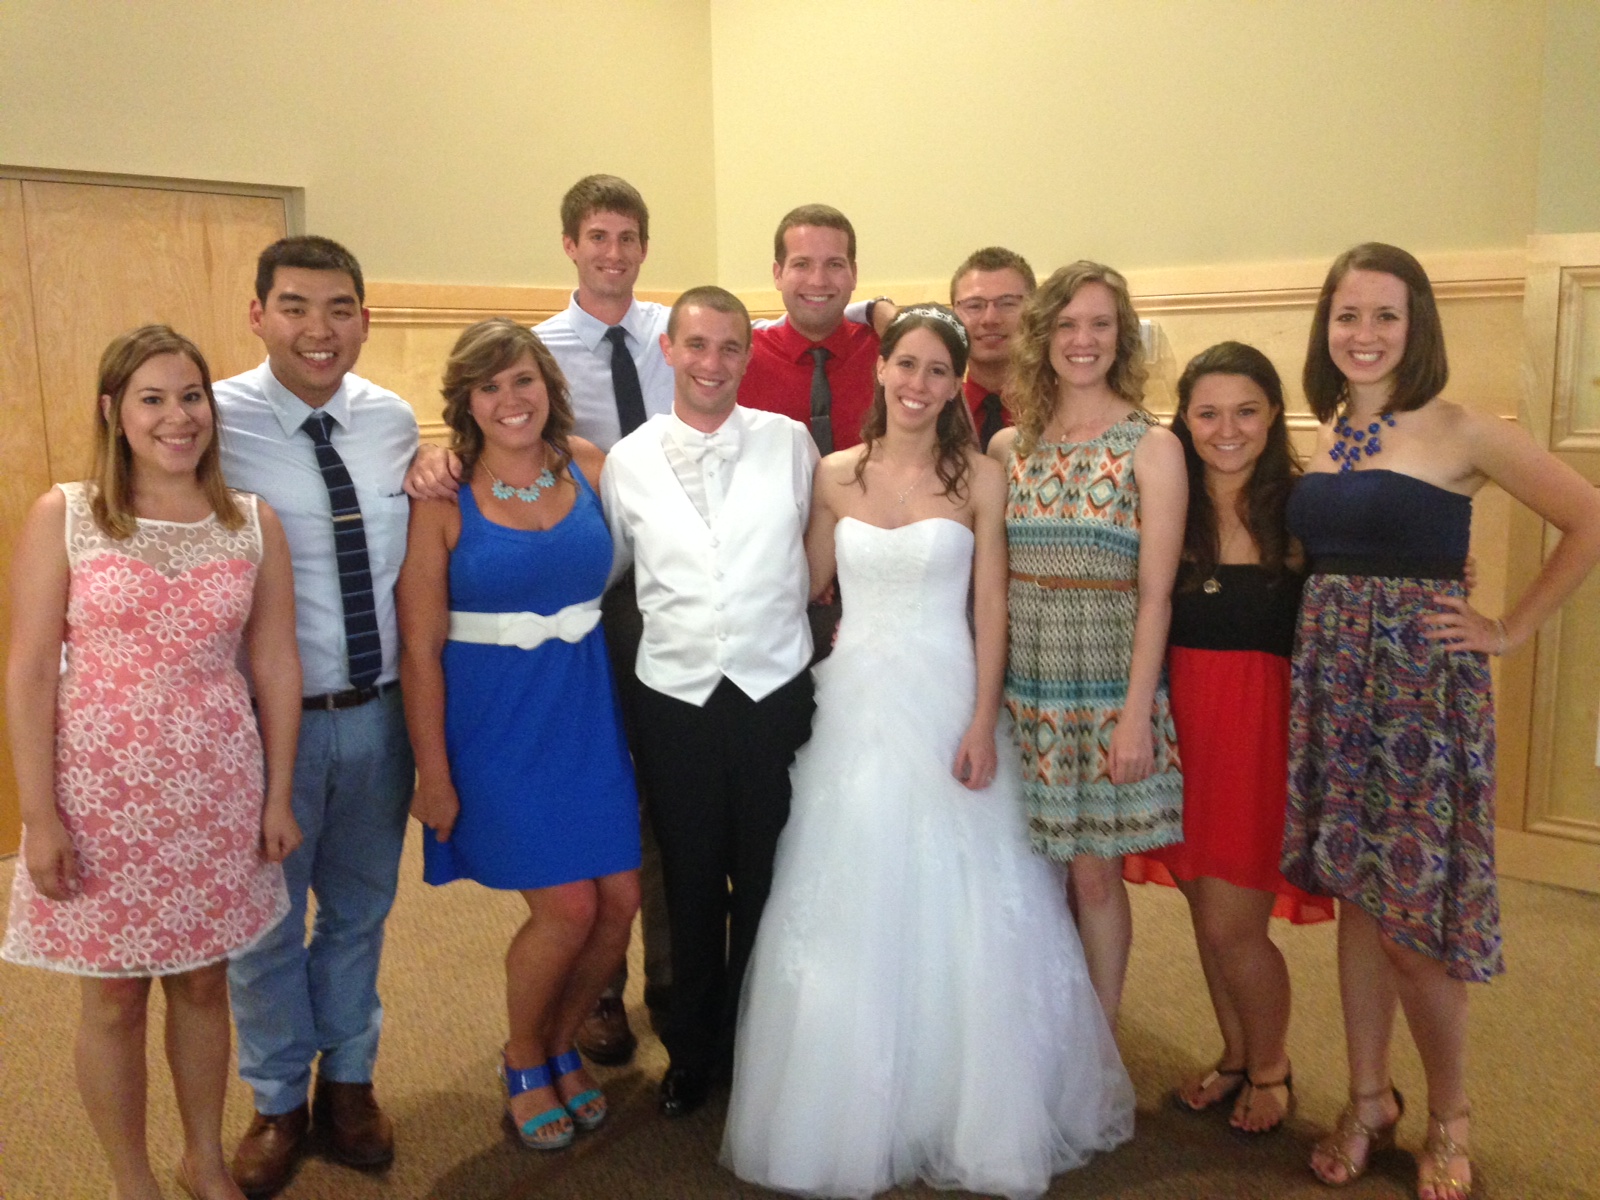 Our Optometry Classmates with the beautiful Bride and Groom.